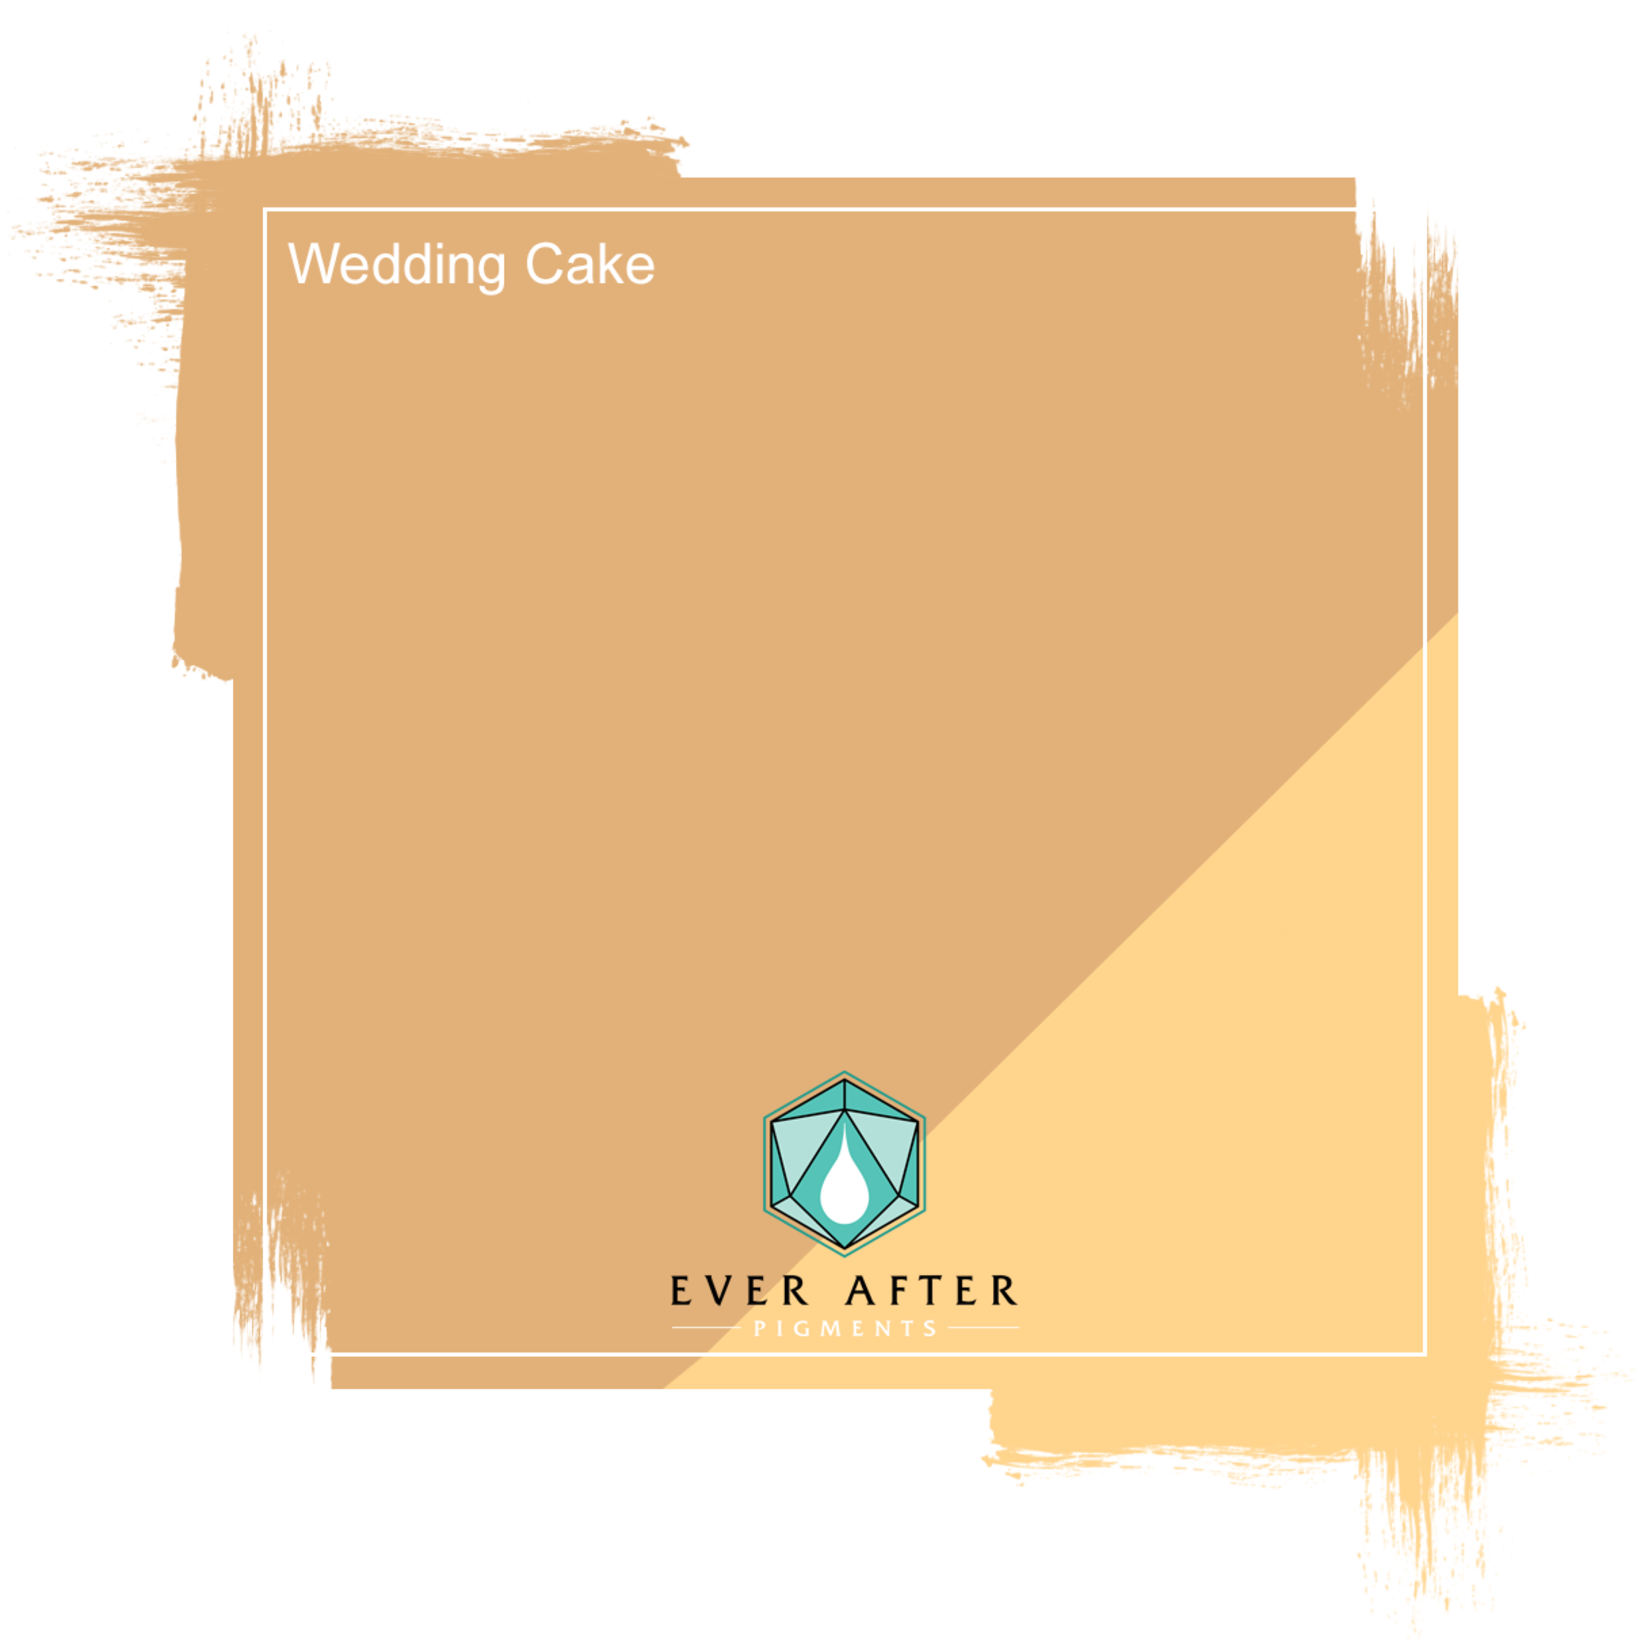 EVER AFTER PIGMENTS - WEDDING CAKE 0.5OZ